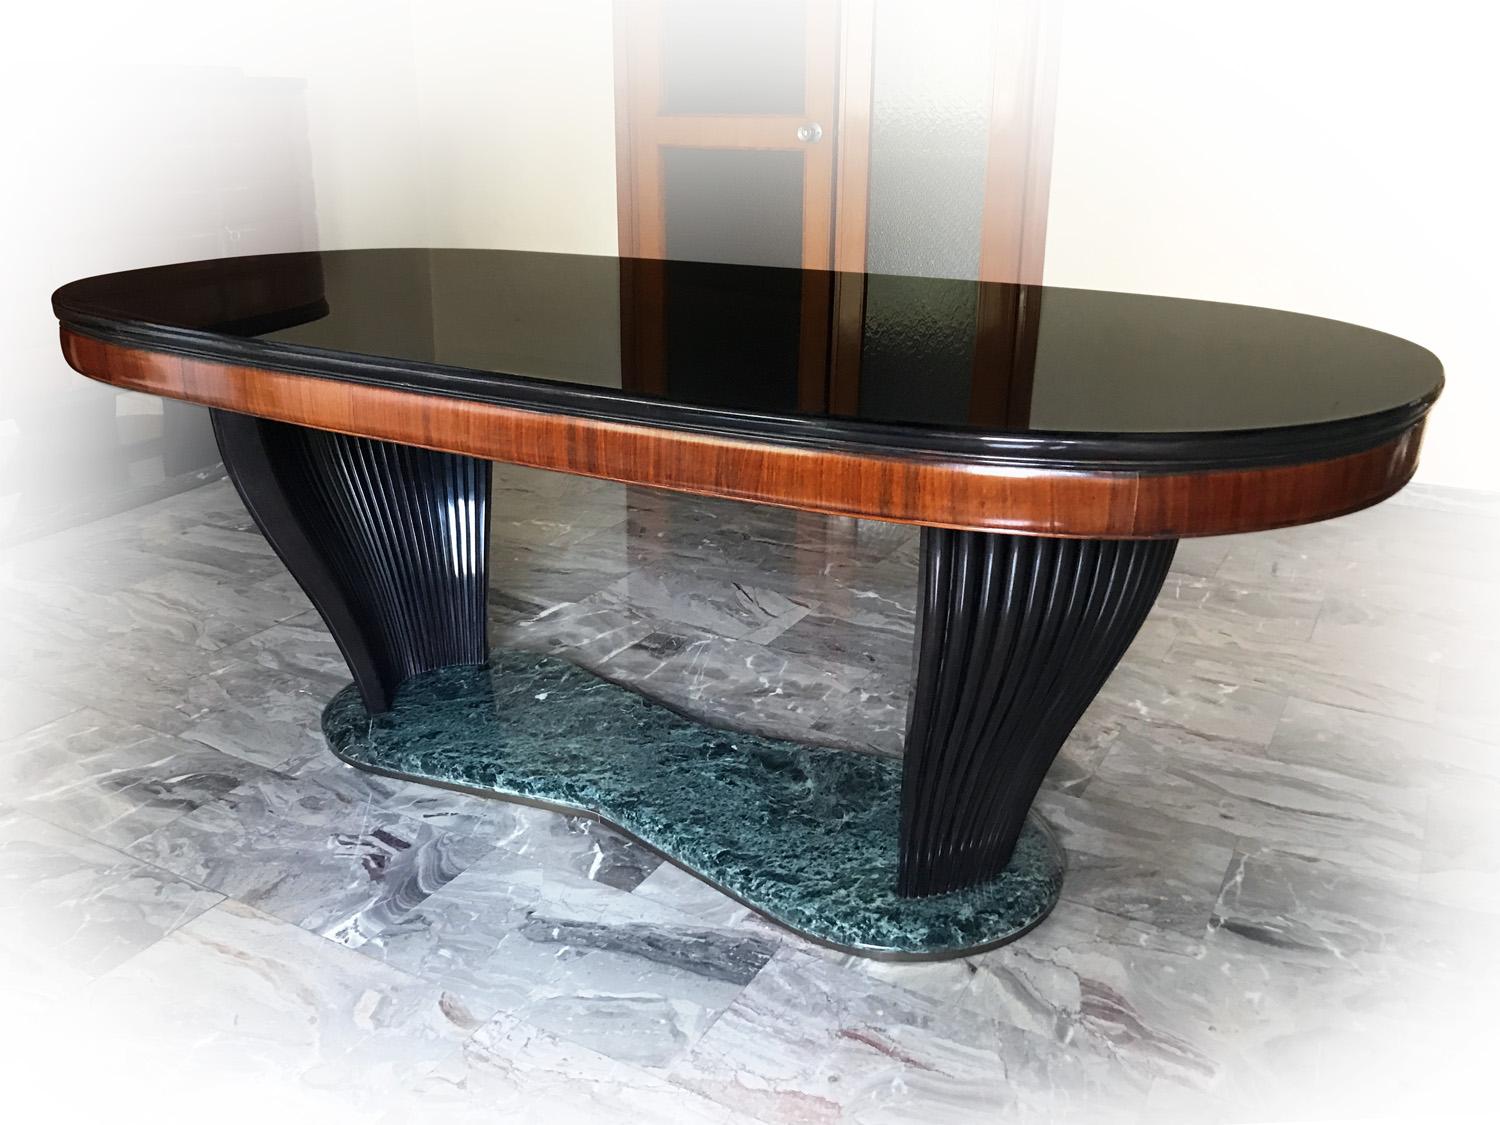 Important and very rare dining table designed by Vittorio Dassi in the 1950s.
The tabletop structure is supported by two grooved solid curved wood elements shaped like shell and fixed on embossed base made in precious marble of the Alps, finished